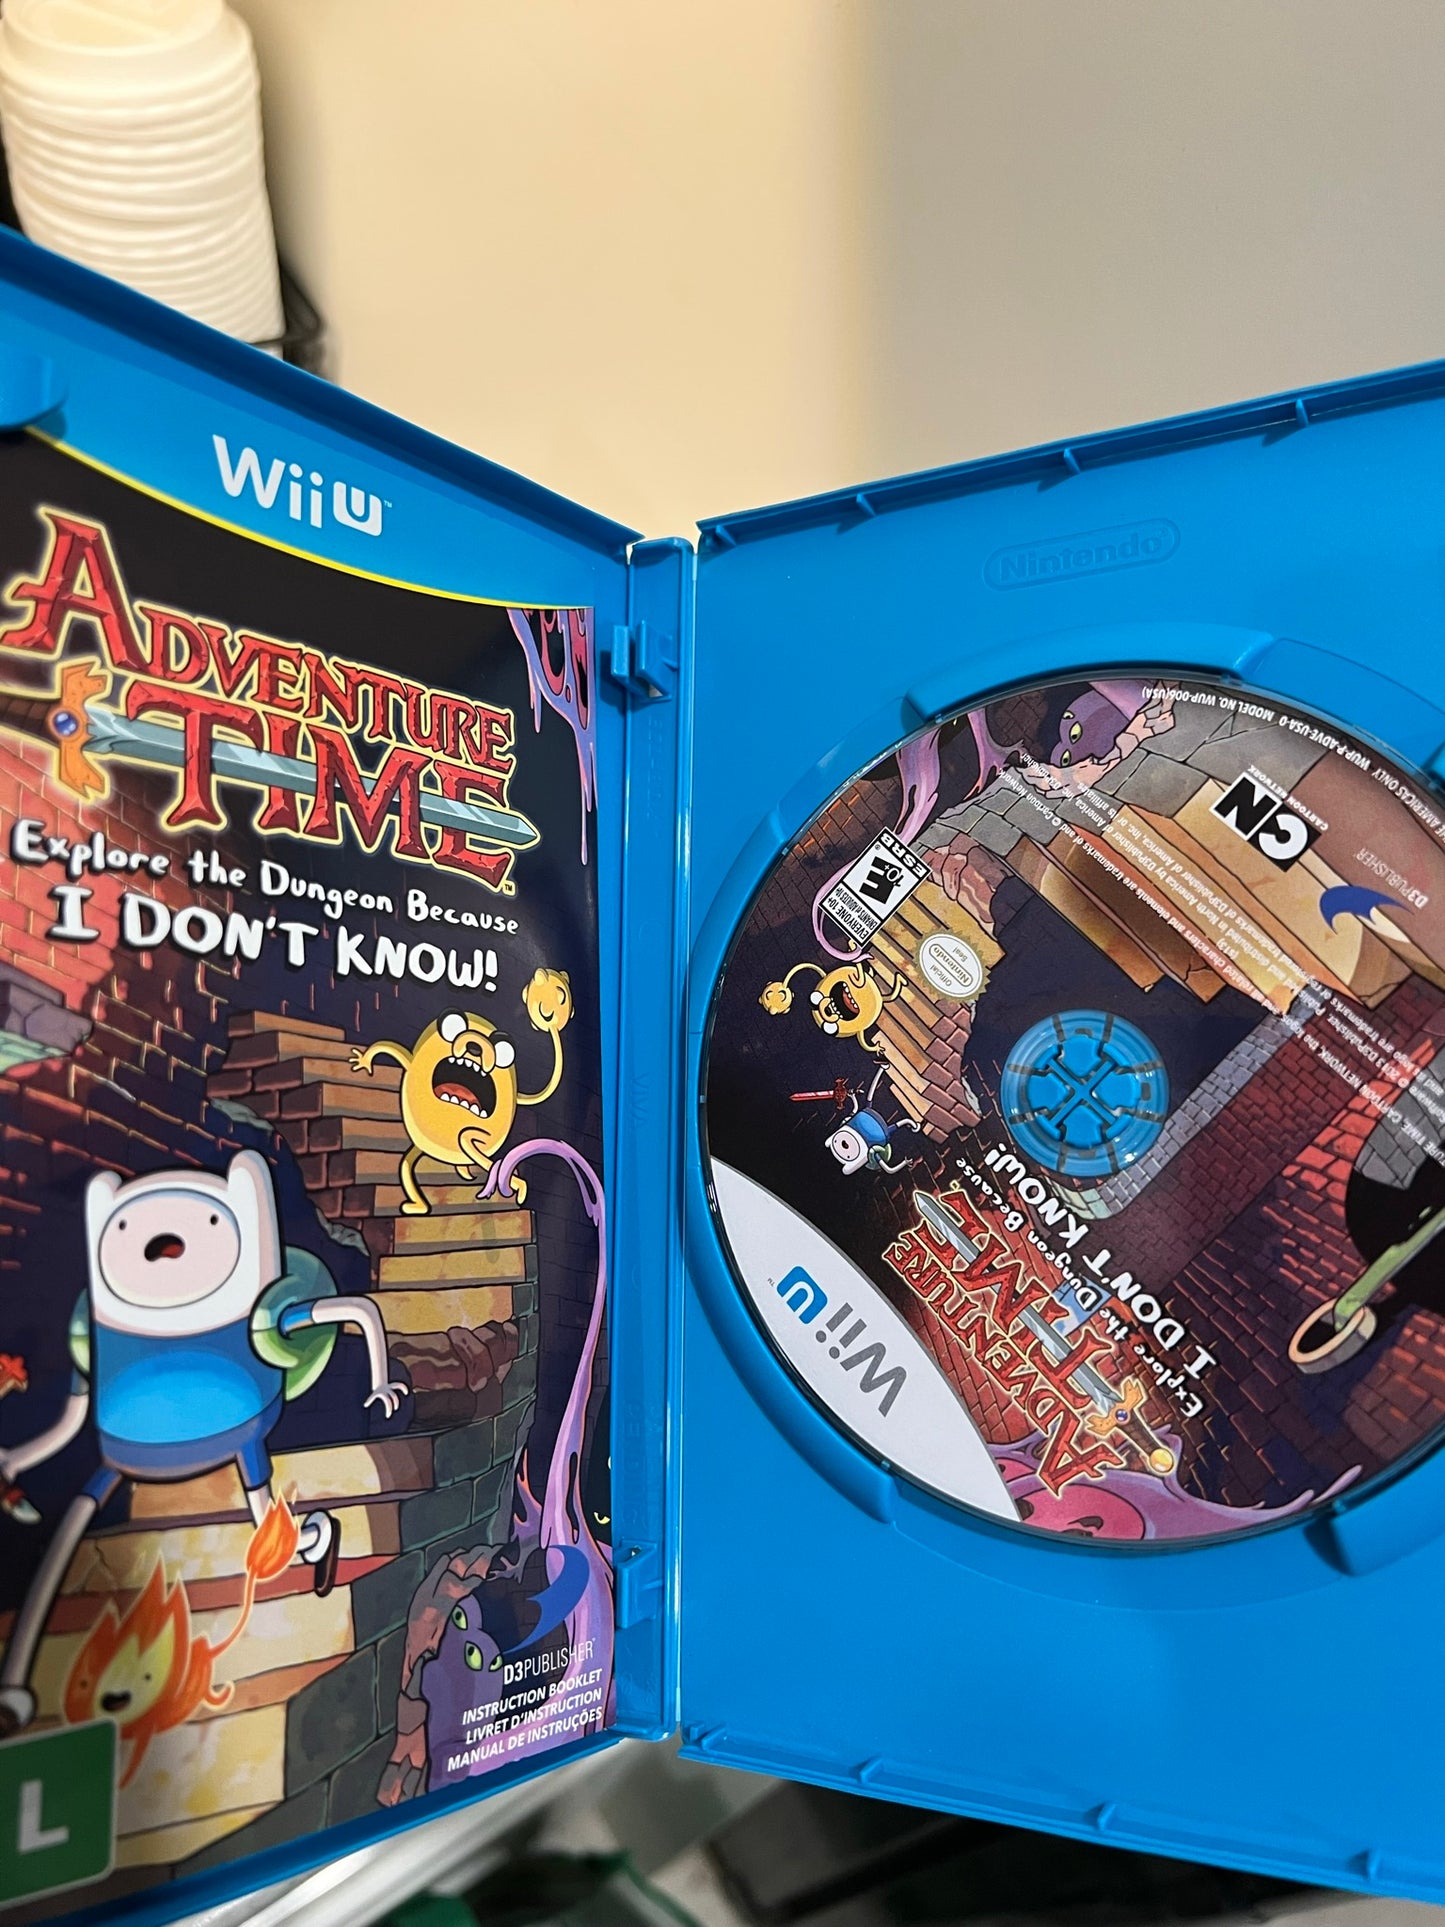 Adventure Time: Explore the Dungeon Because I Don't Know (Nintendo Wii U, 2013)